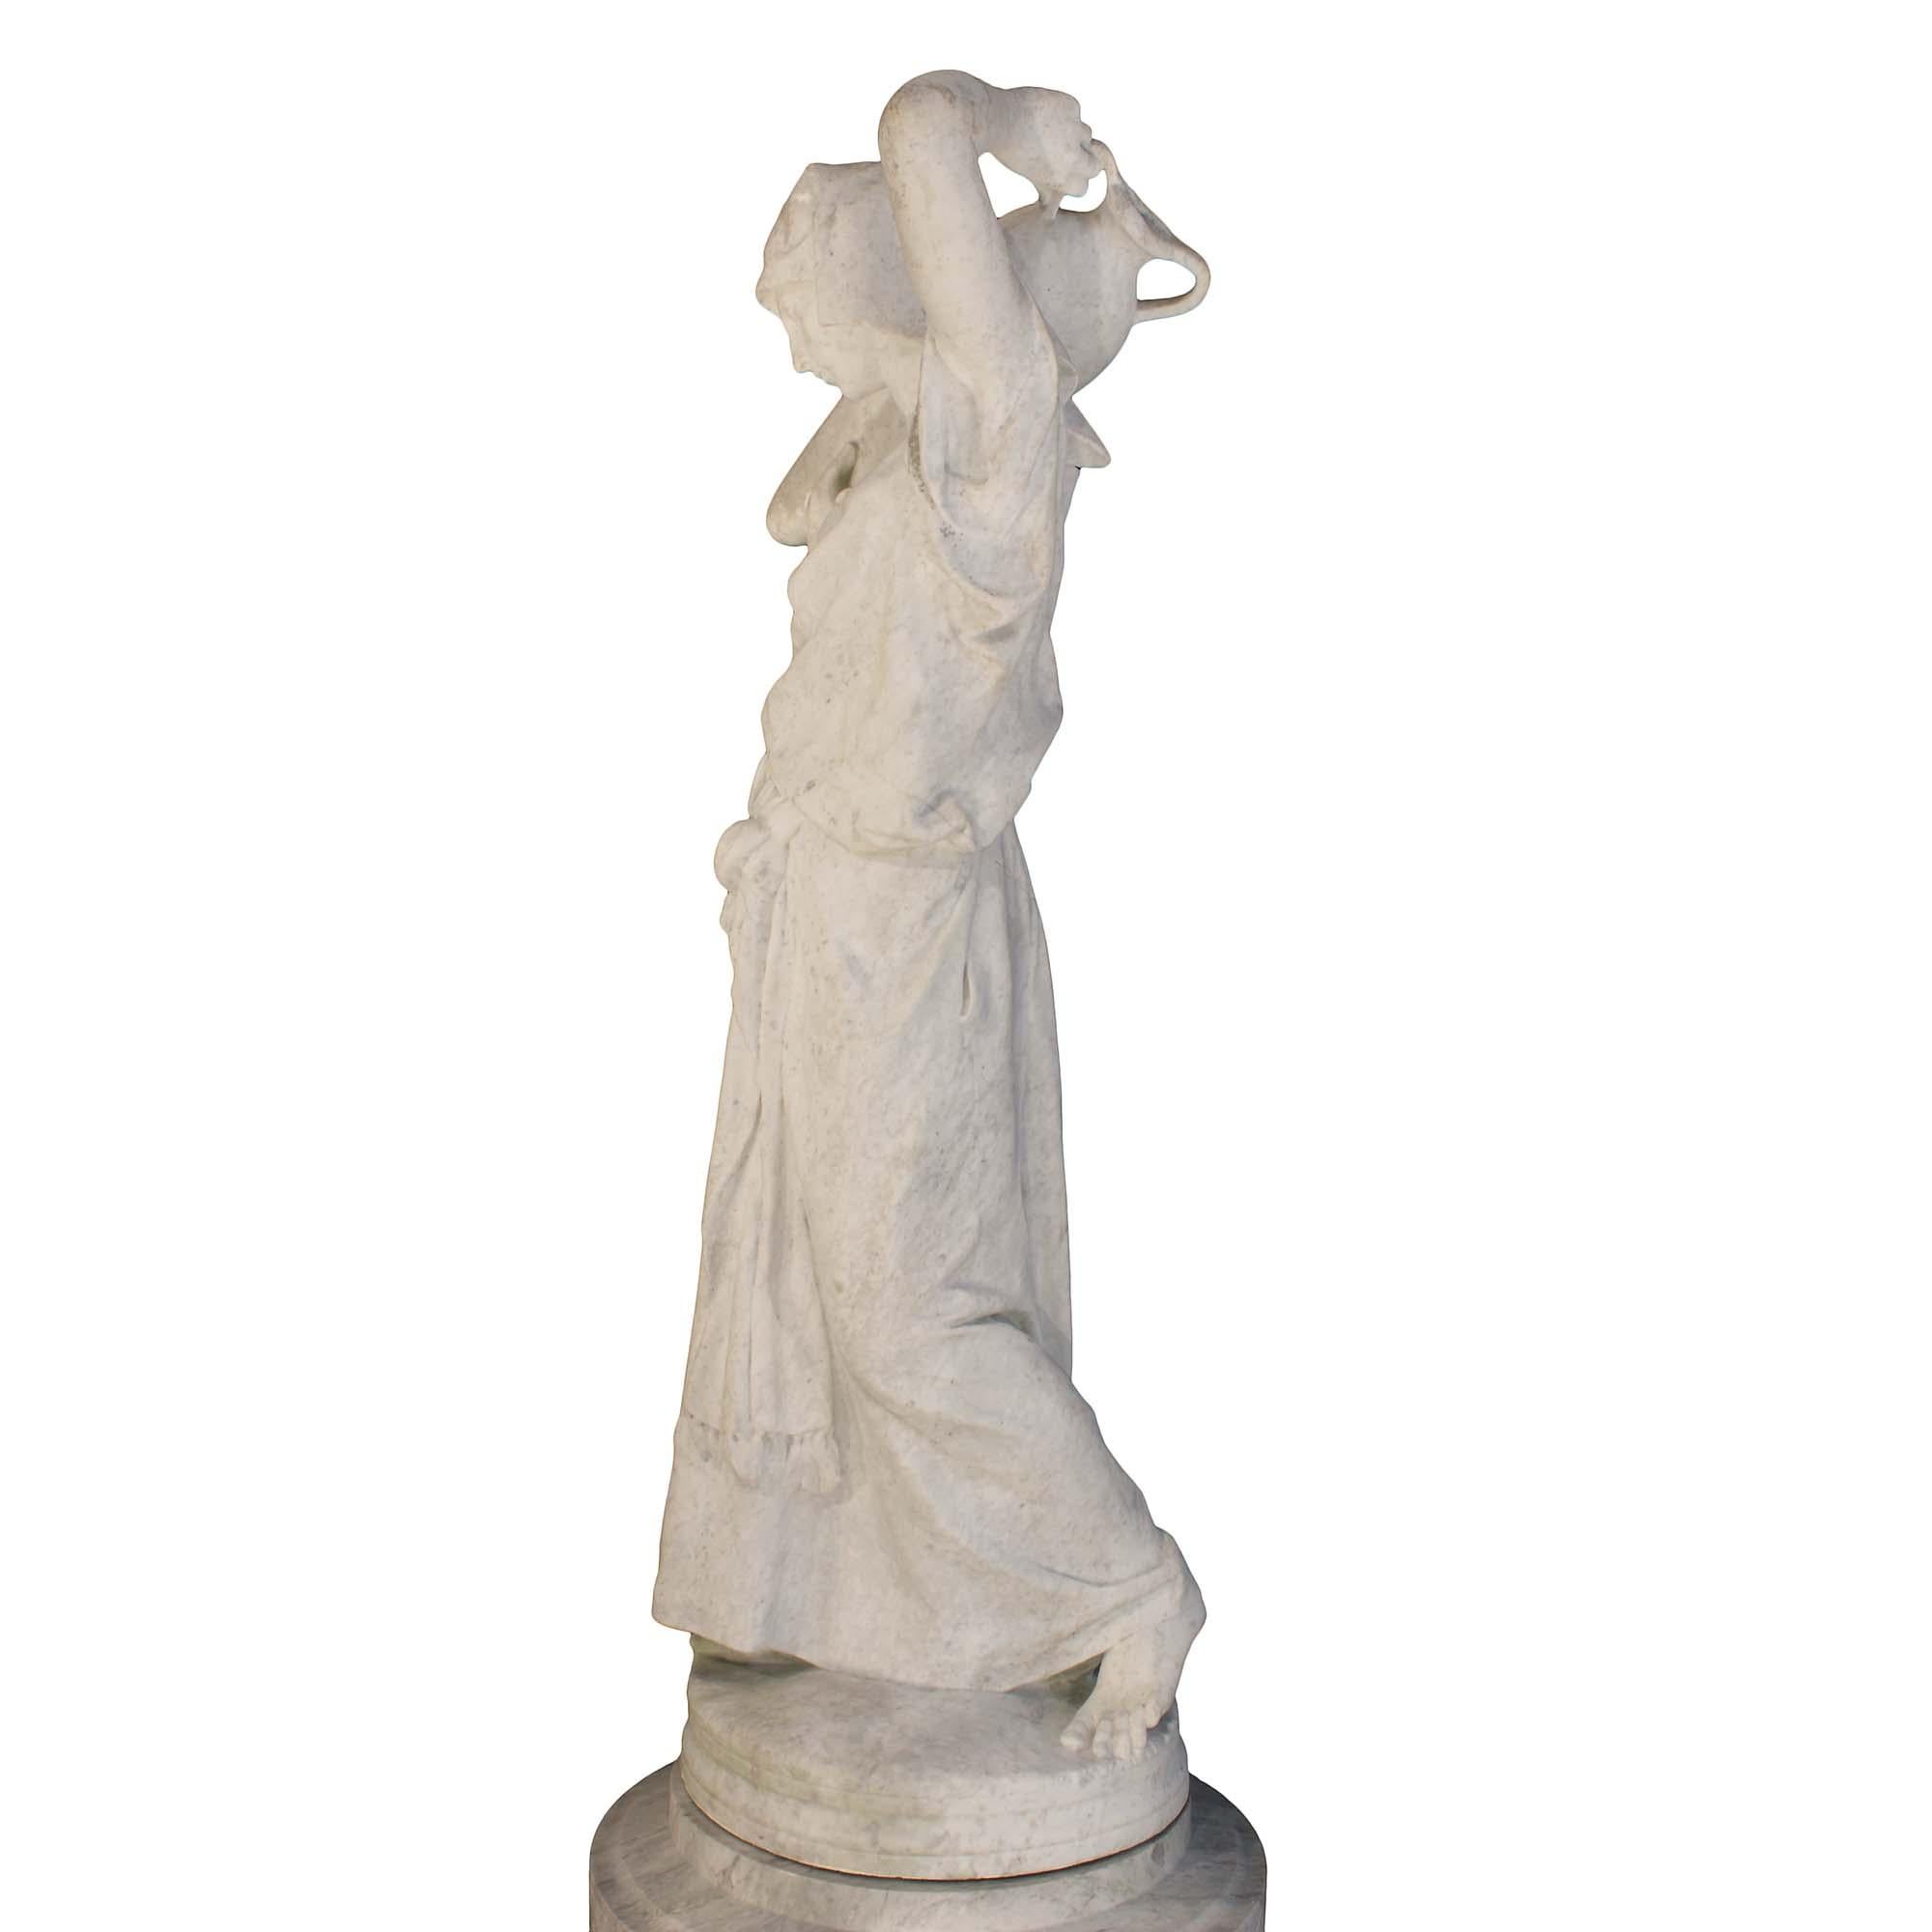 A very impressive and grand scale Italian mid 19th century white Carrara marble statue on a Gris St. Anne pedestal, signed Lazzarini. The statue is of a maiden in classical drape, with bare feet, carrying a large wine urn on her shoulder. The